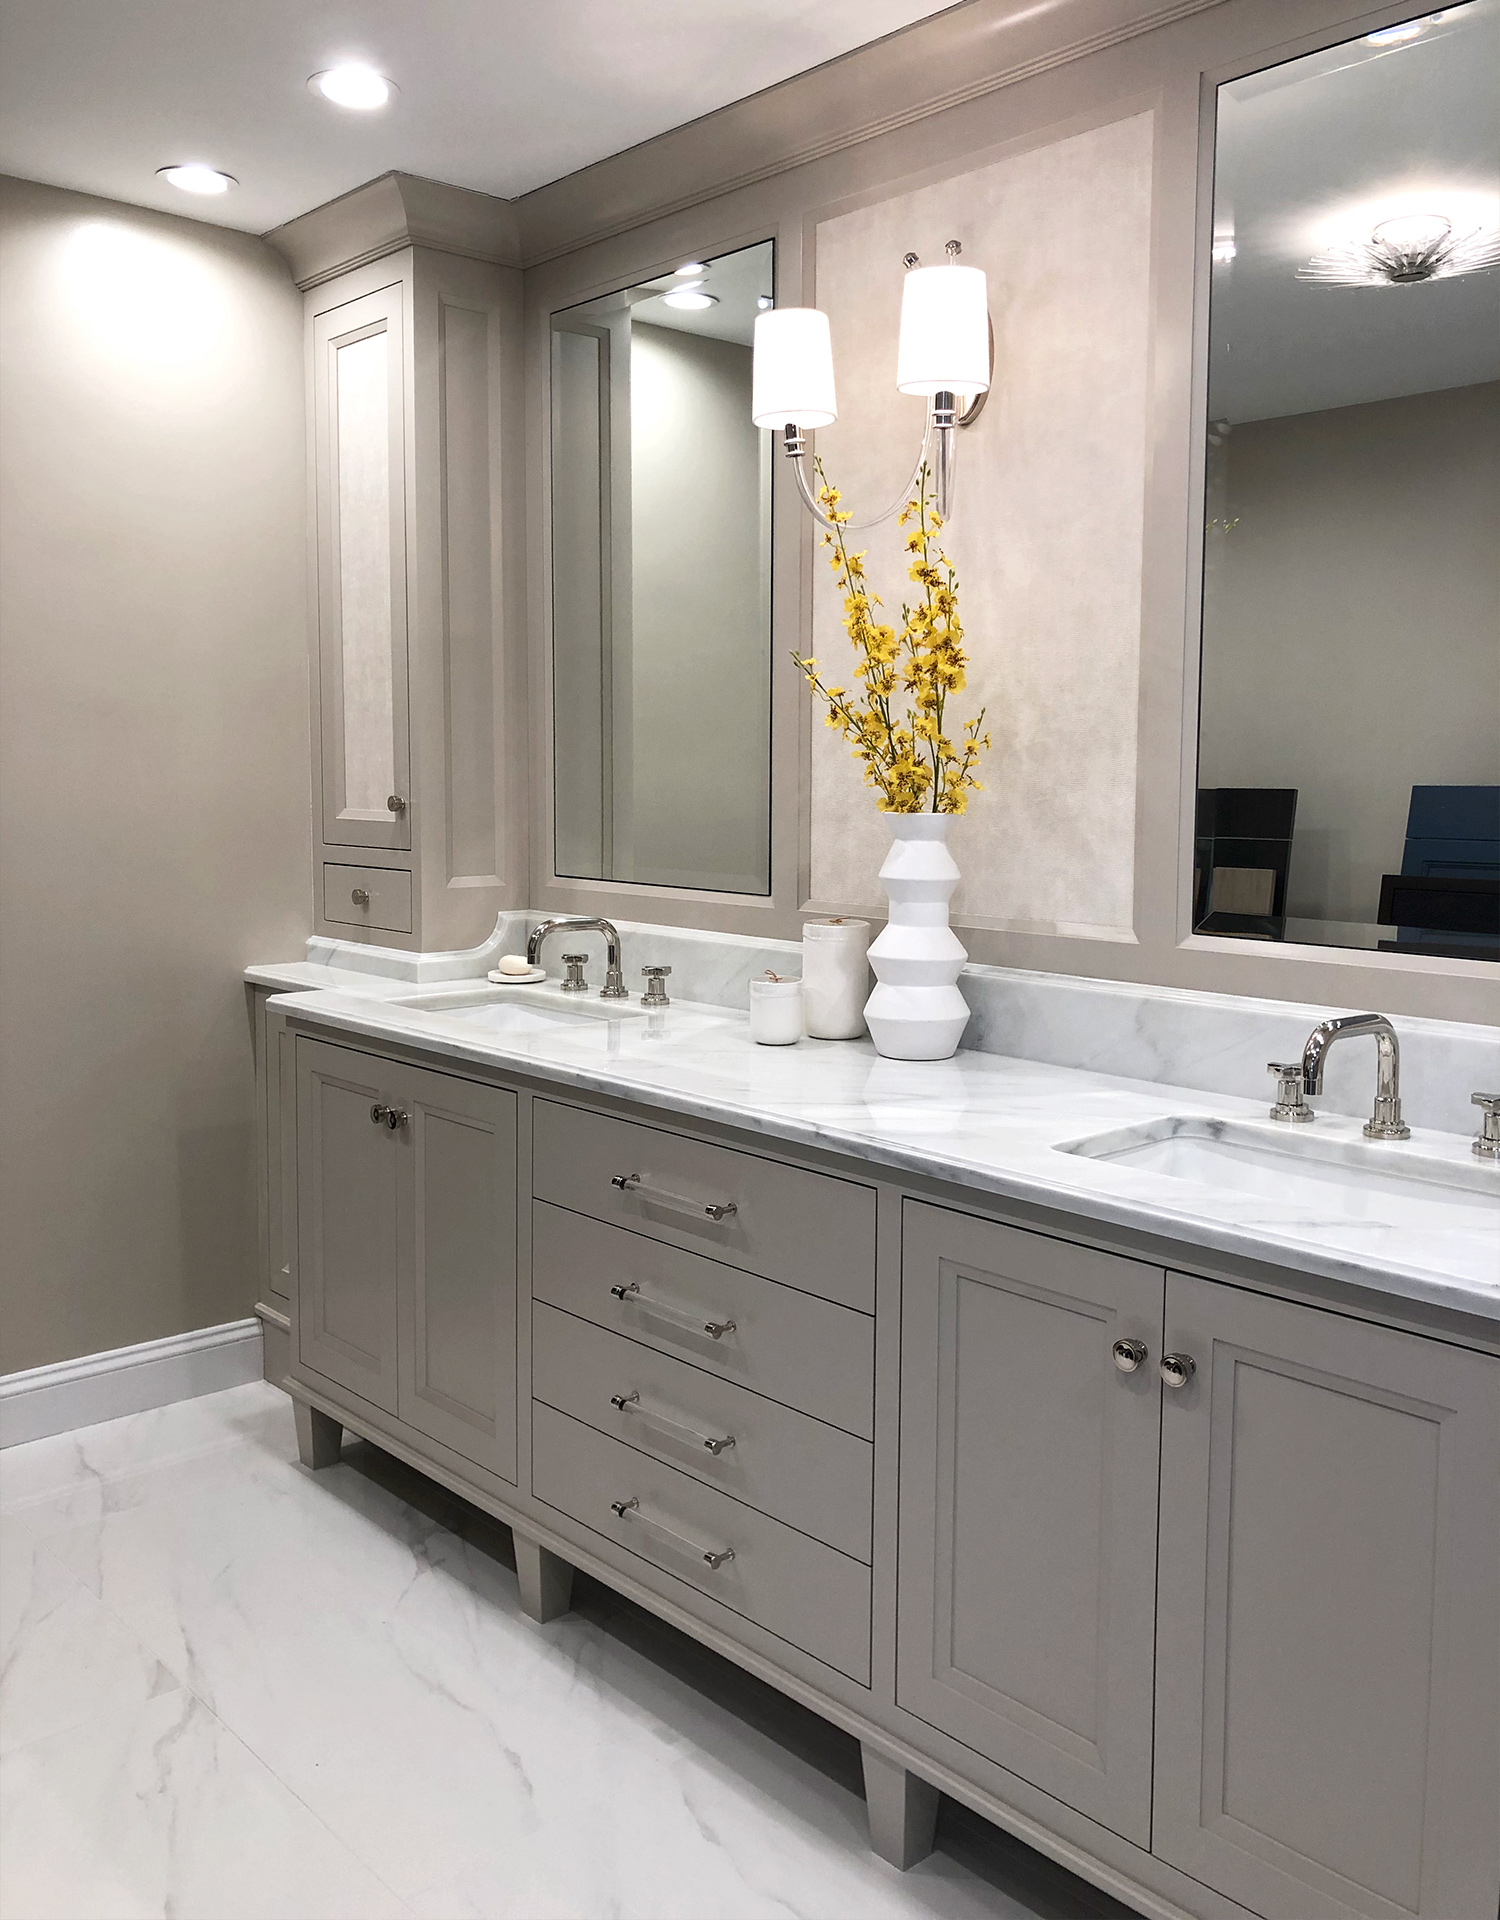 Visit either of two DEANE showrooms to explore their design capabilities and custom cabinetry for every room in your home.